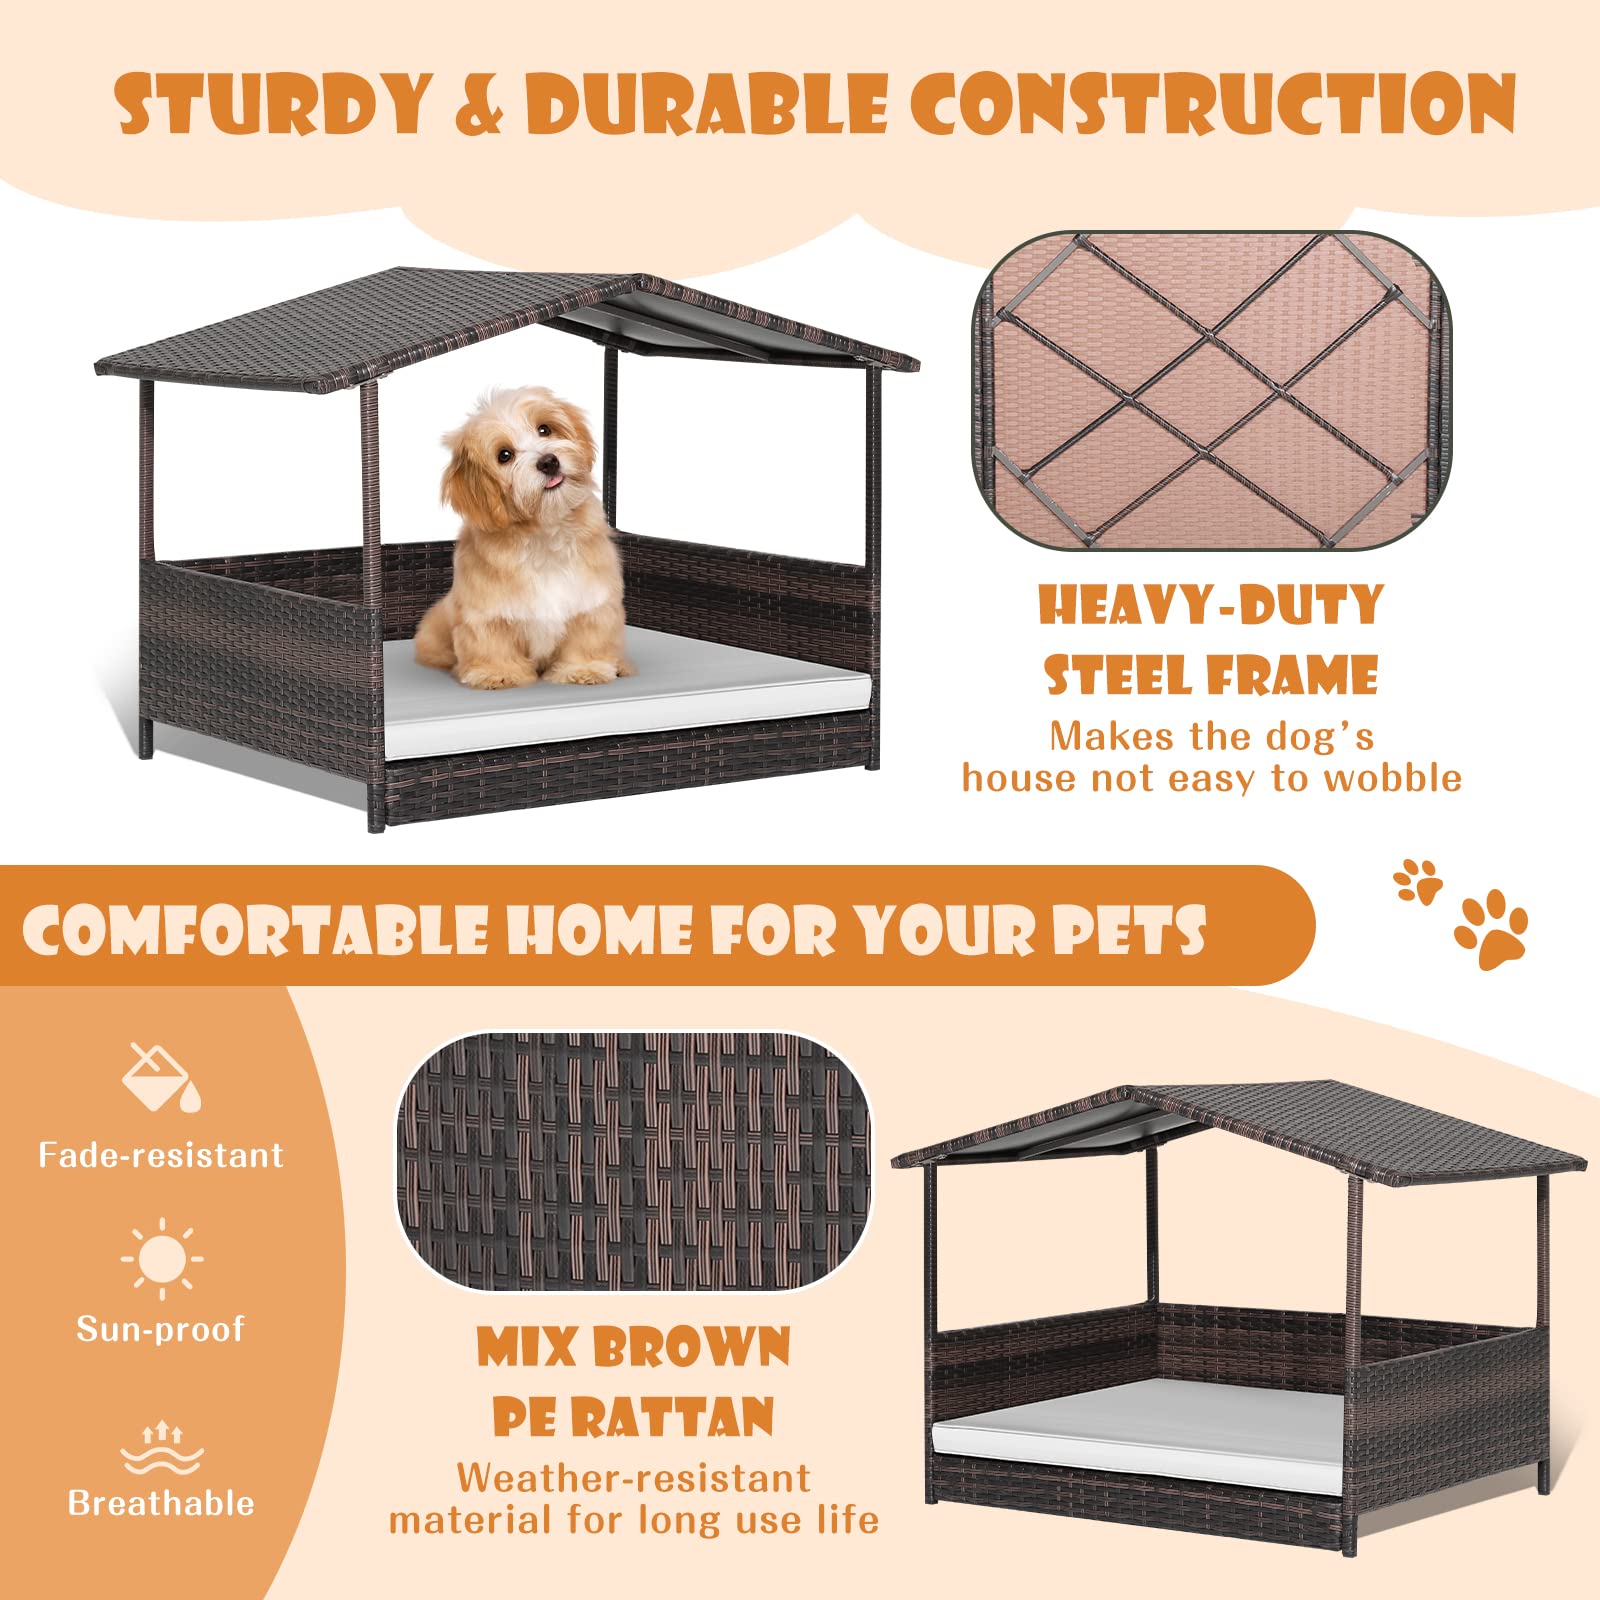 Giantex Wicker Dog House, Raised Rattan Dog Bed with Roof, Removable Cushion and Steel Frame